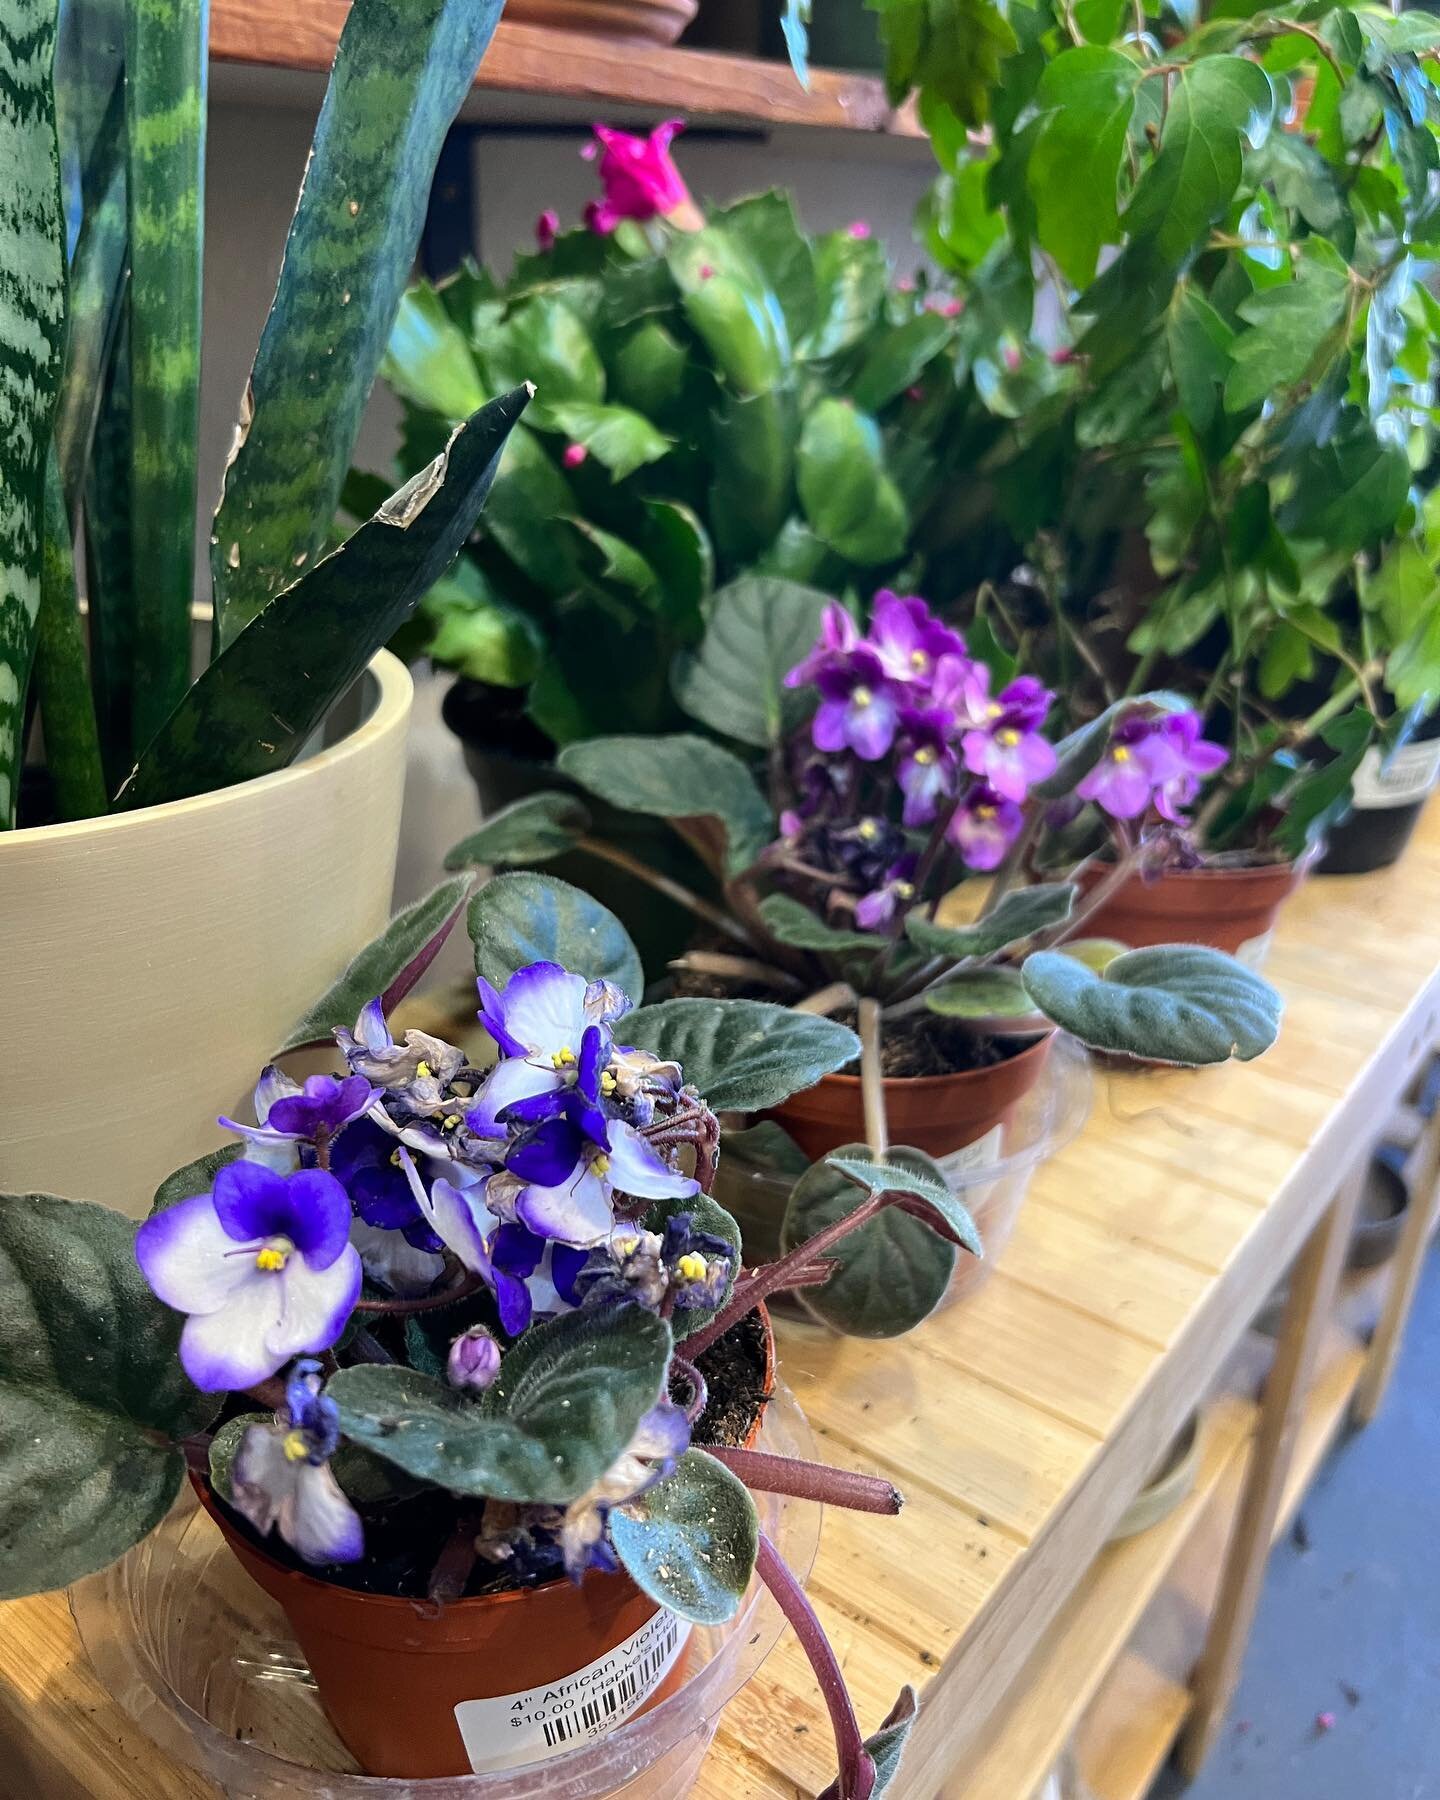 Our plant shipments arrived yesterday 😍 so many new beauties in the shop just in time for the weekend. African Violets, Red Necklaces, Christmas Cacti and Orchids oh my!

New locally handmade concrete pots by @houseamericana are in, in all shapes an